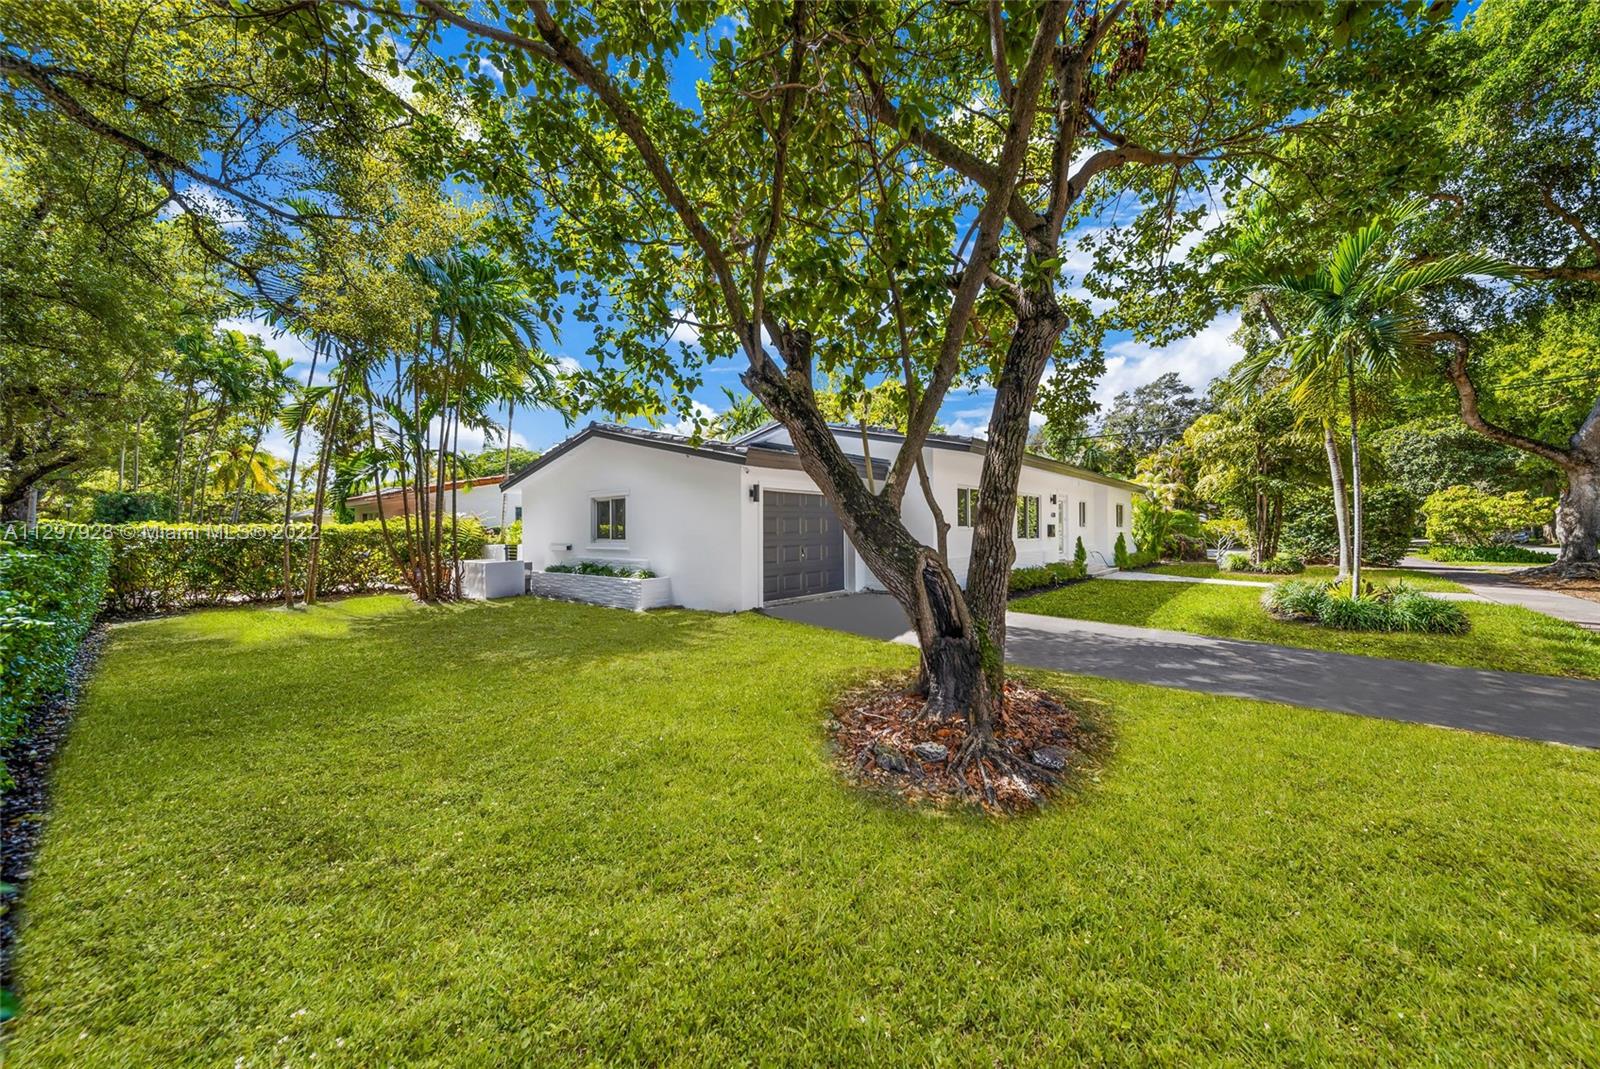 A completely remodeled Single Family house at prime location in Coral Gables! 3 beds 2 baths and car garage! High-end finishes include 24x48 imported Spanish porcelain flooring, gorgeous custom kitchen with black stainless steel appliances, new electrical & PVC plumbing, and much more. IMPACT windows all around the house. Built-in BBQ in the backyard. Brand new driveway, and much more. 7k sqft lot! Take advantage of this beautiful house Ready to move in! Won't last - The driveway, approach, and landscaping are to be finished during November! (Waiting for approval permit). See staging.